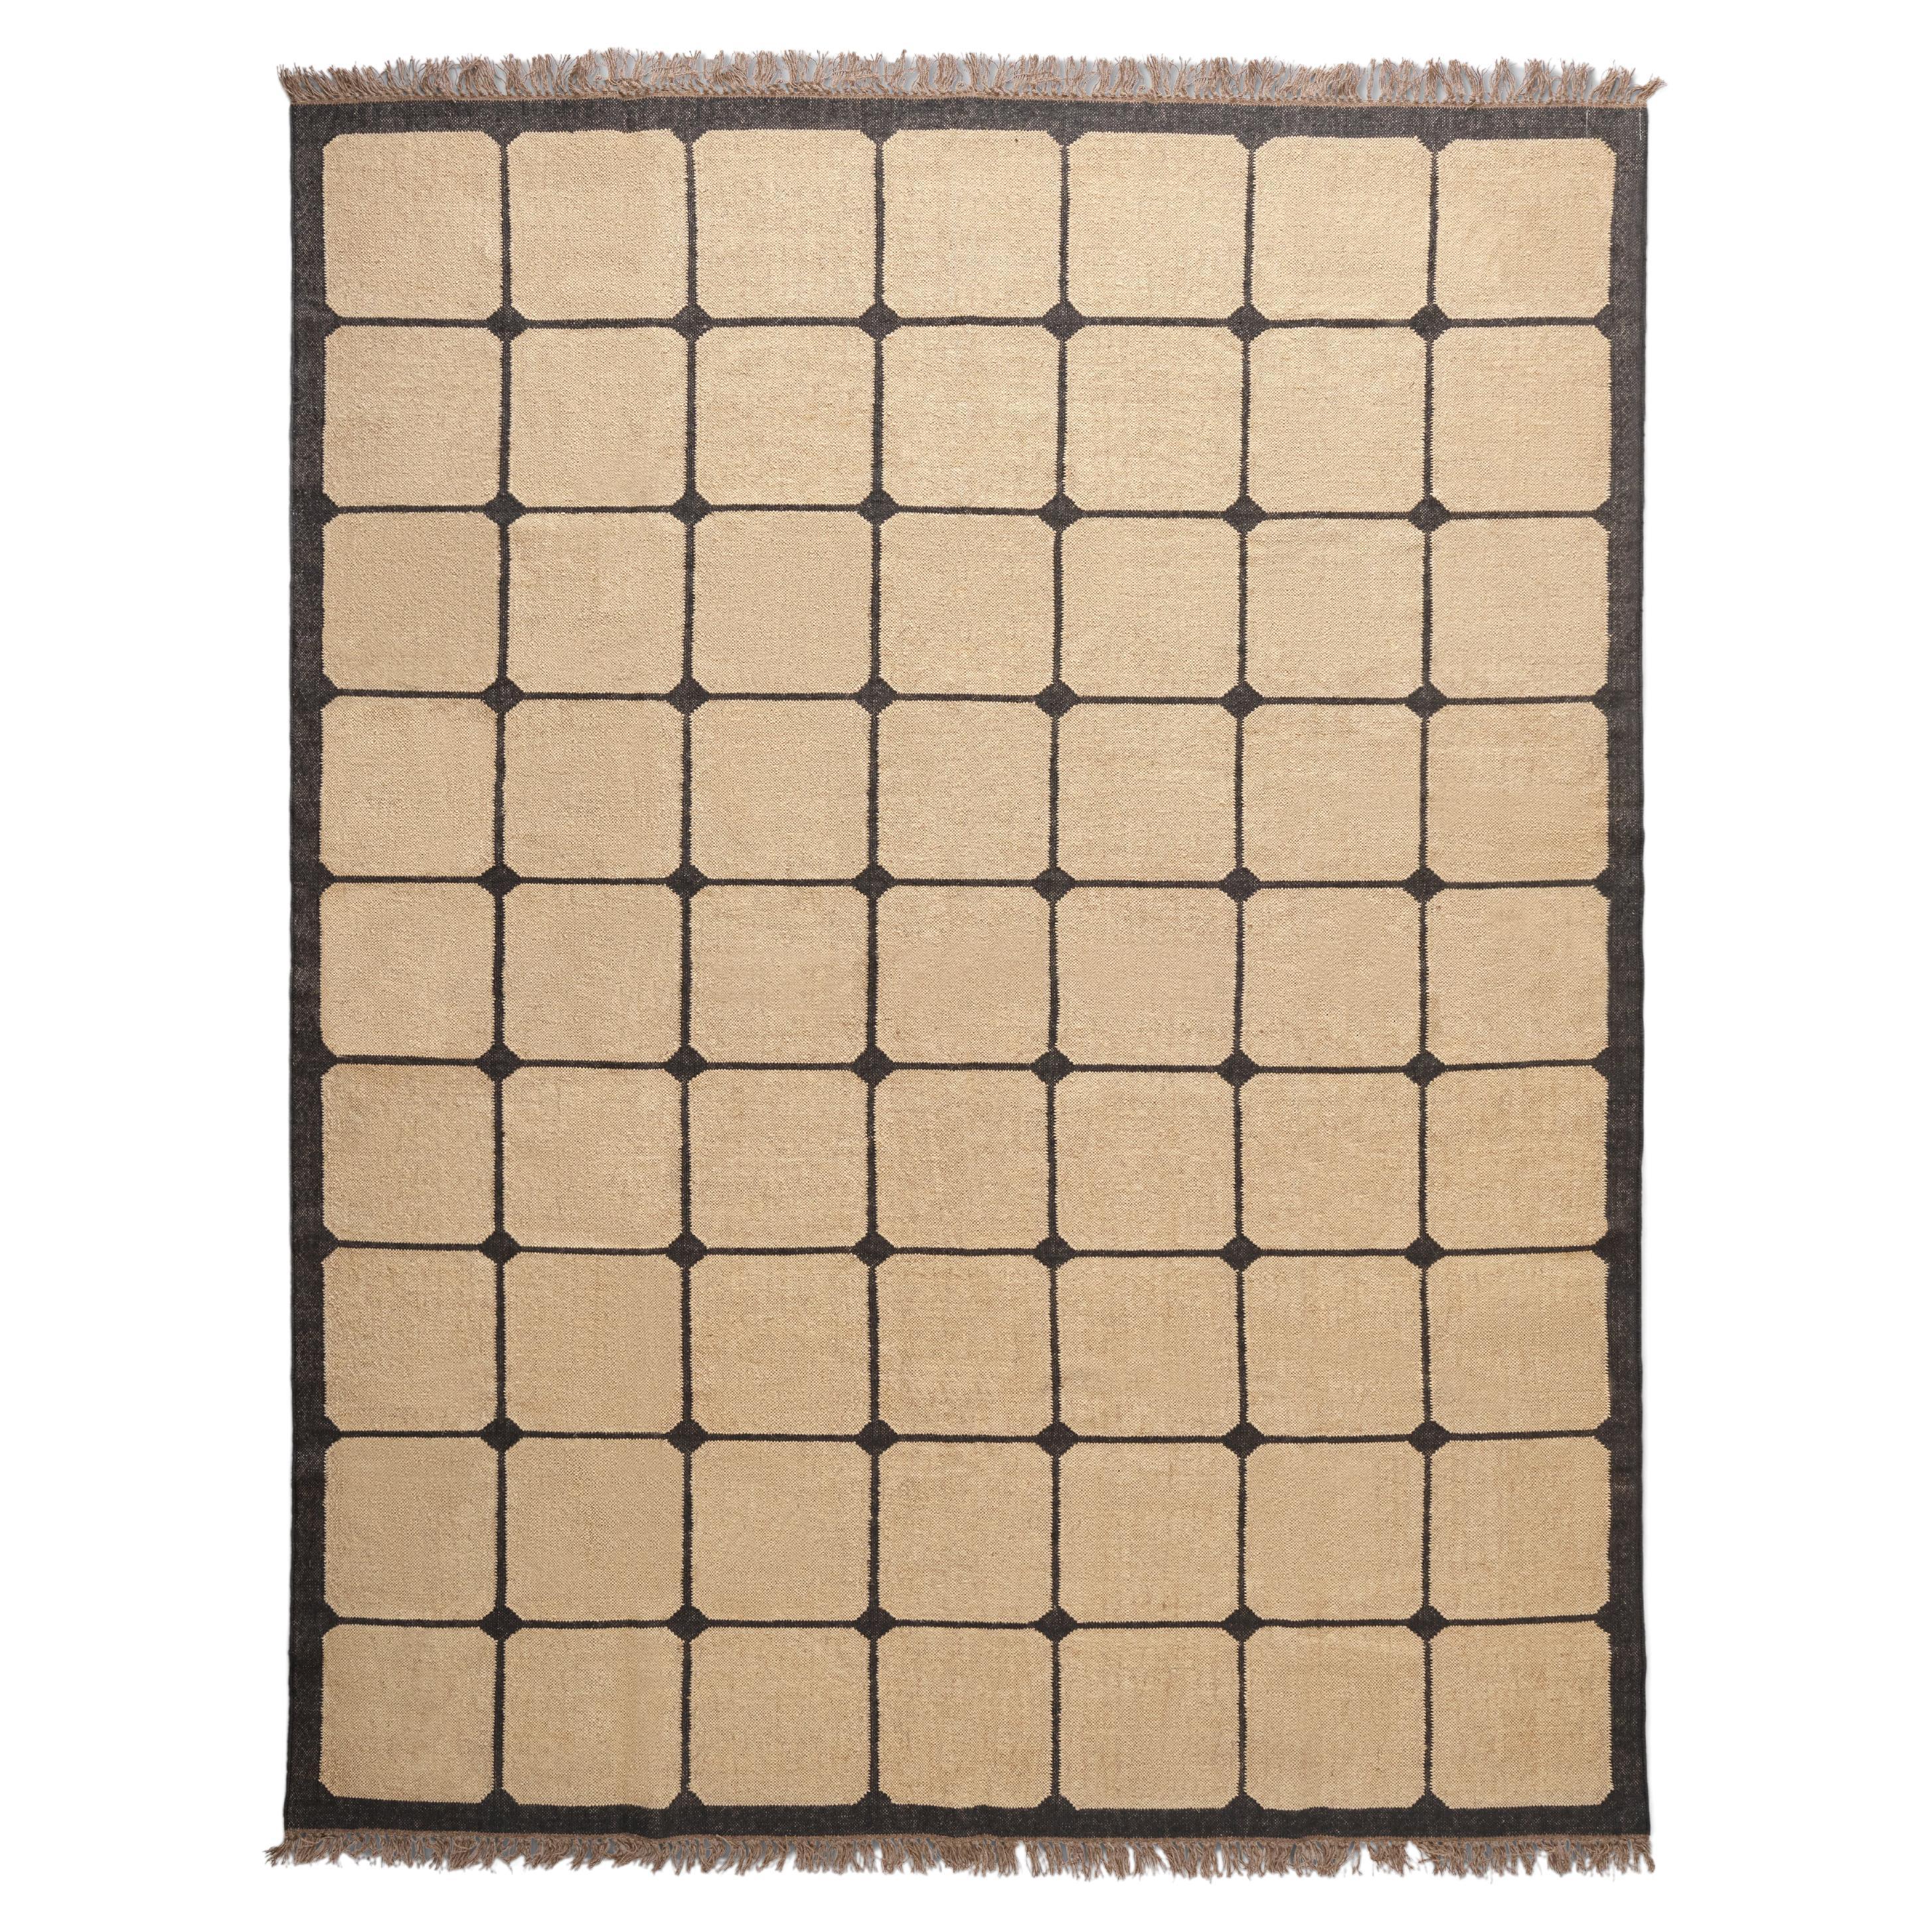 The Forsyth Checkerboard Rug - Tile Checks in Off Black, 8x10 For Sale